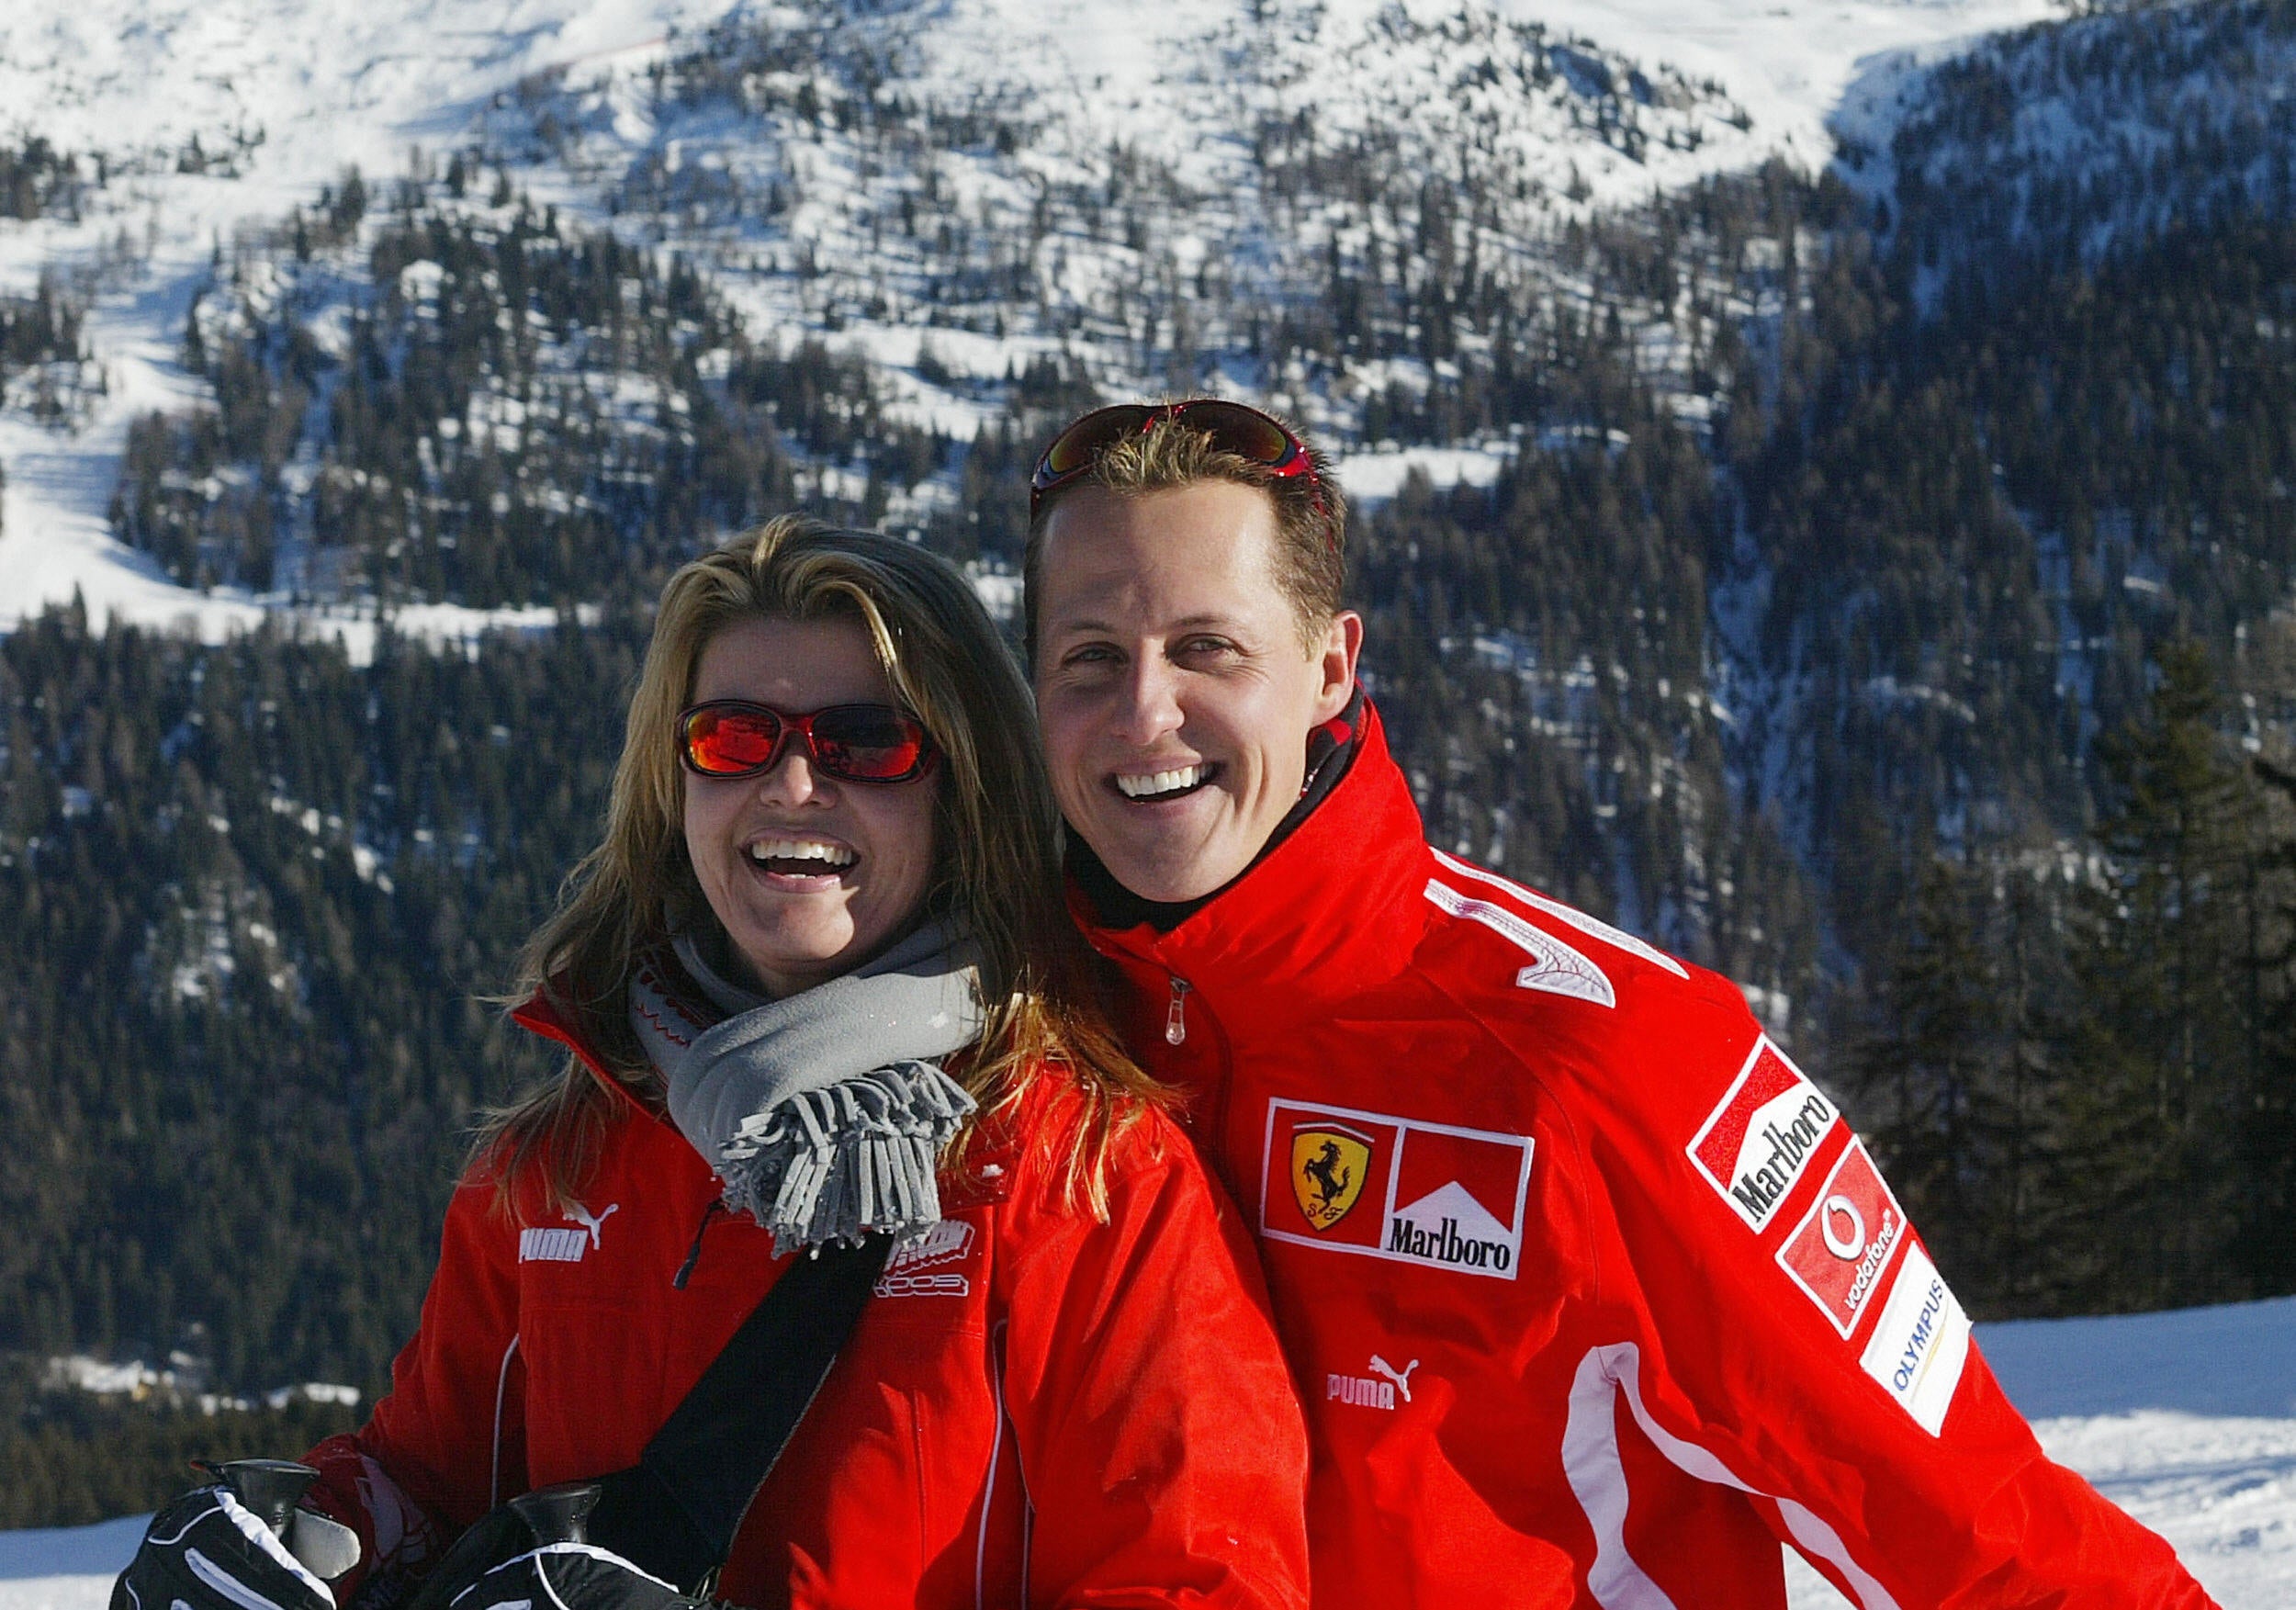 Michael Schumacher has not been seen publicly for more than 10 years after his skiing accident